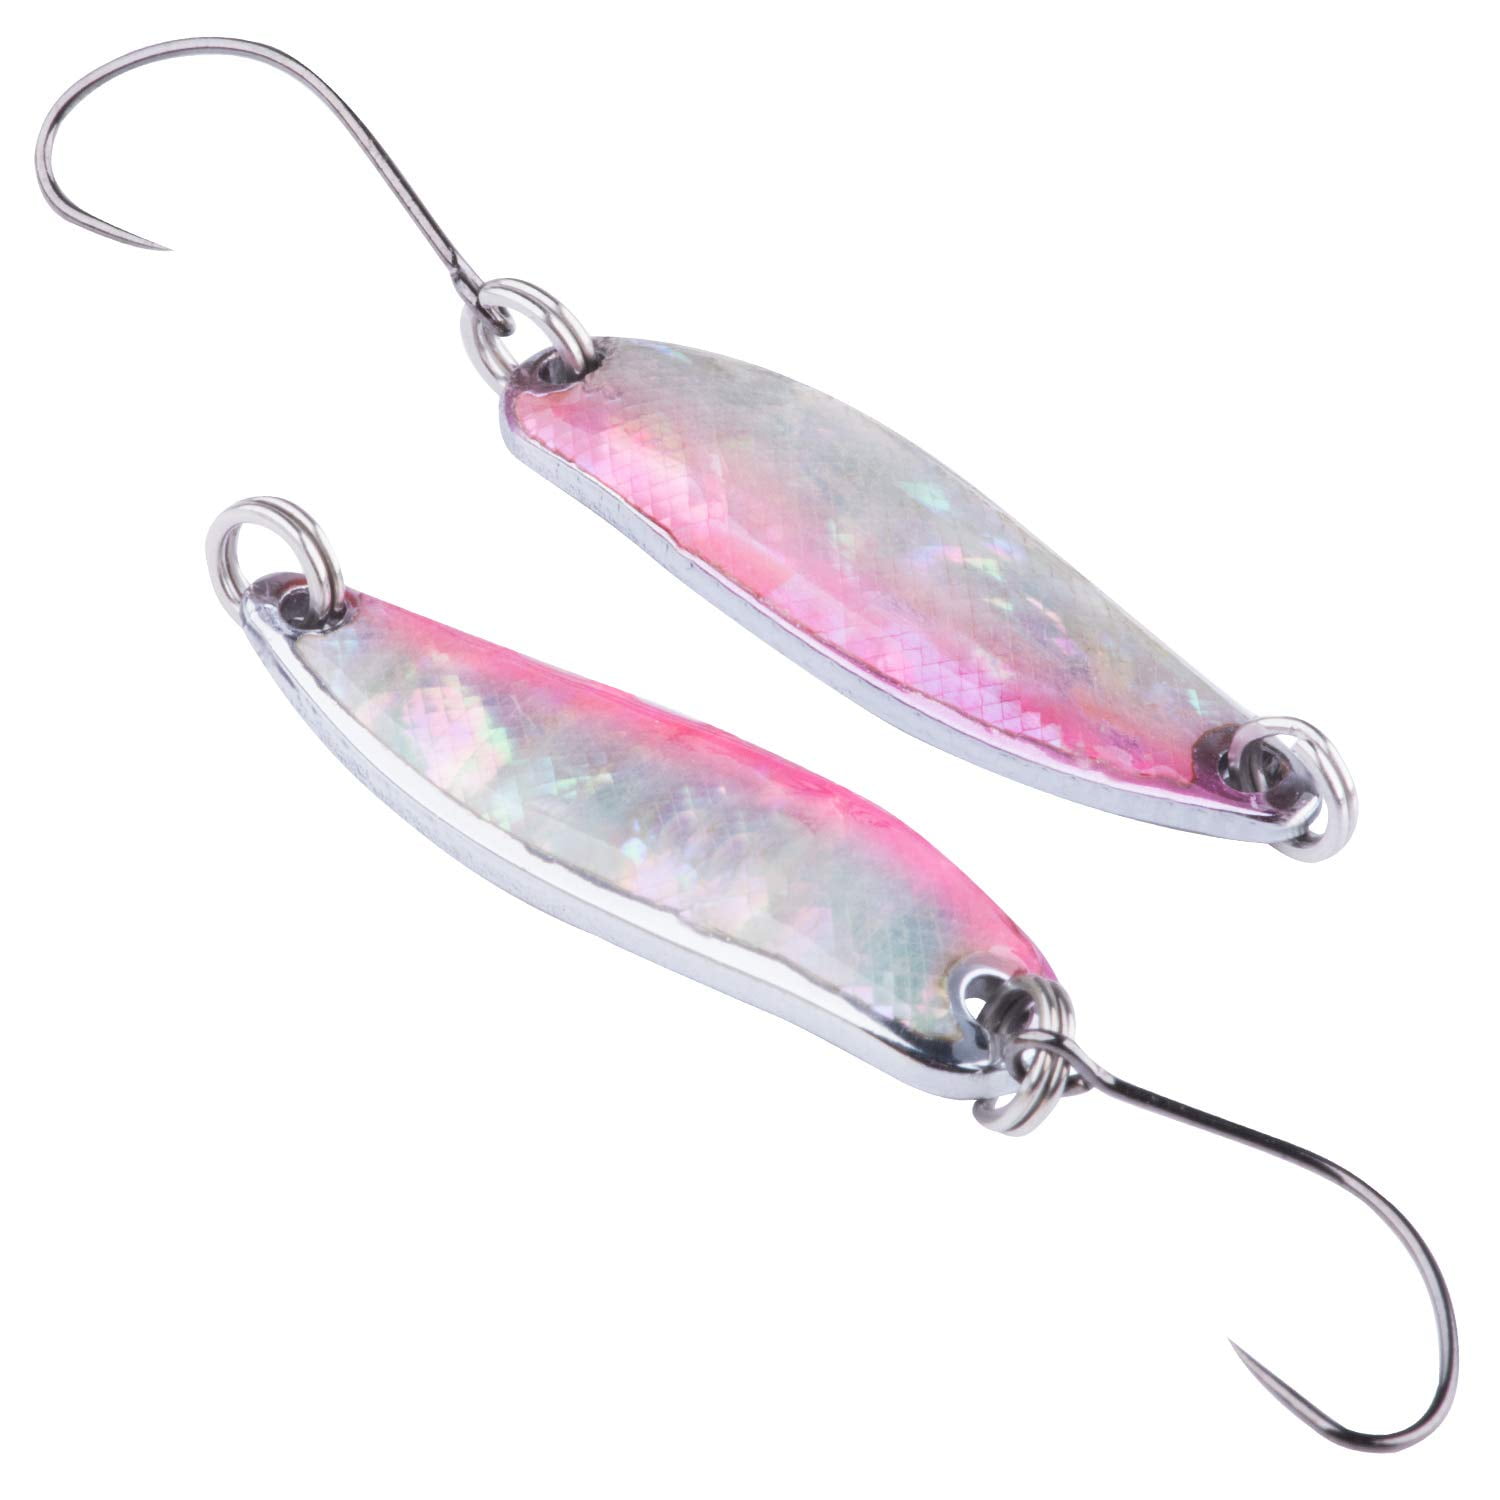 Goture Fishing Spoon Lure Reflective Fishing Jigs Fishing Lures for Panfish, Sunfish, Bluegill, Walleye, Crappie, Pike TroutBass, Size: A-3CM-0.1OZ-5(